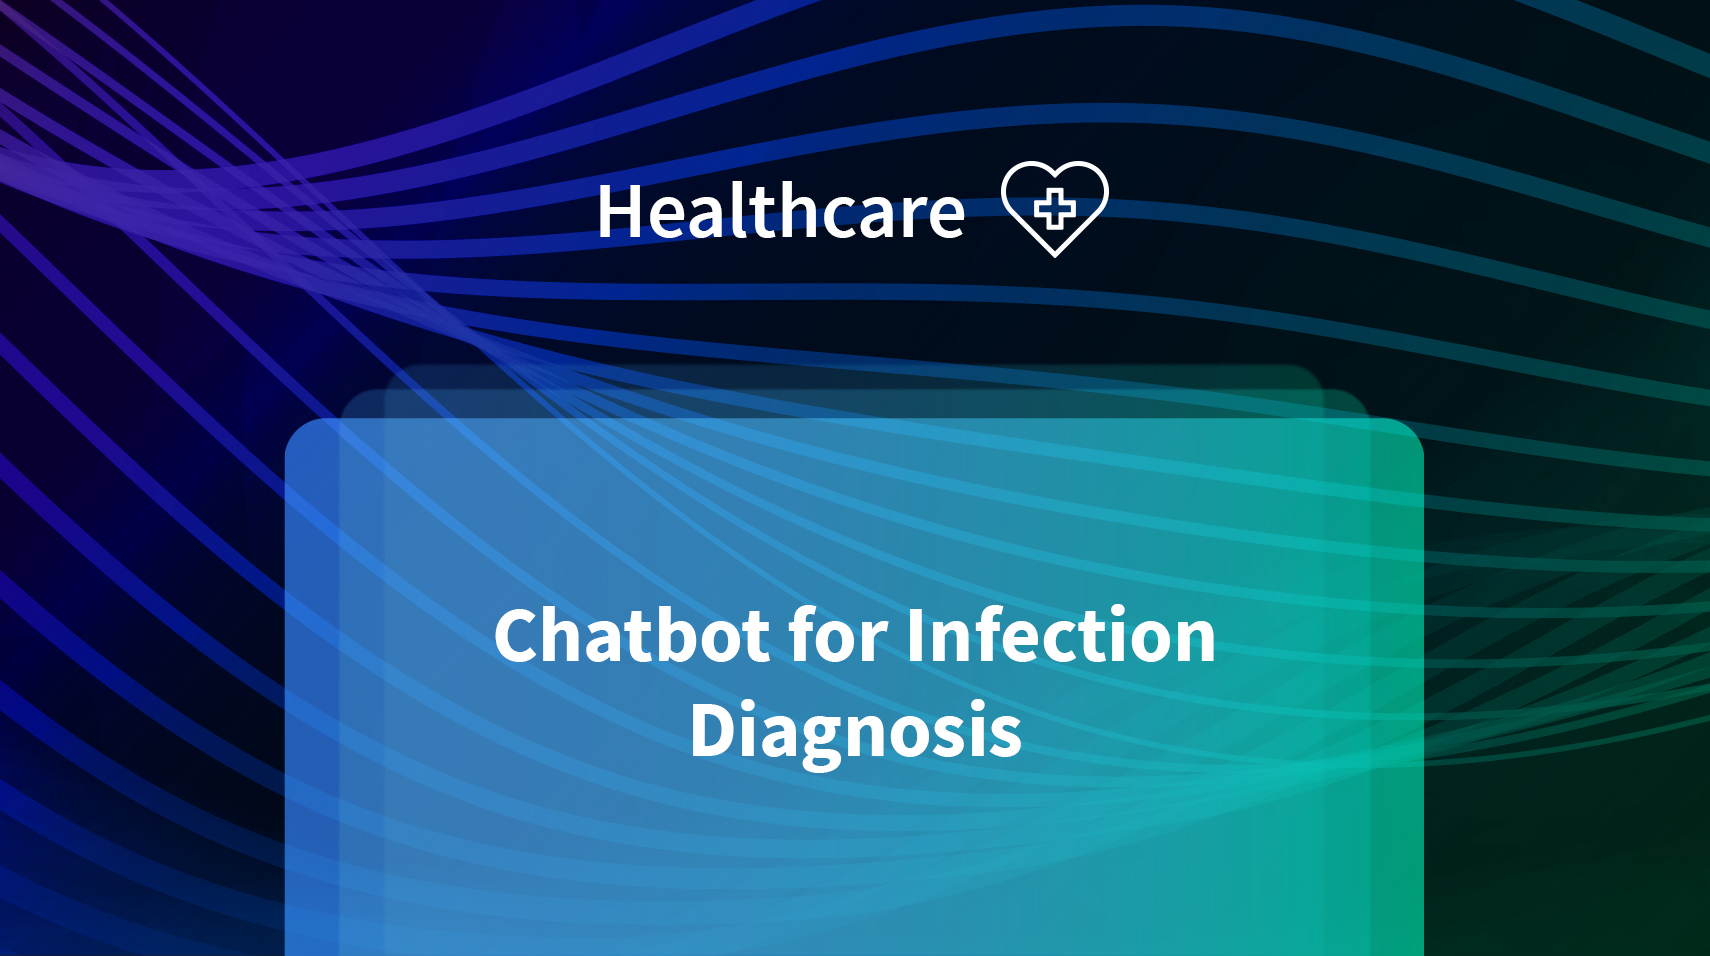 Chatbot for Infection Diagnosis